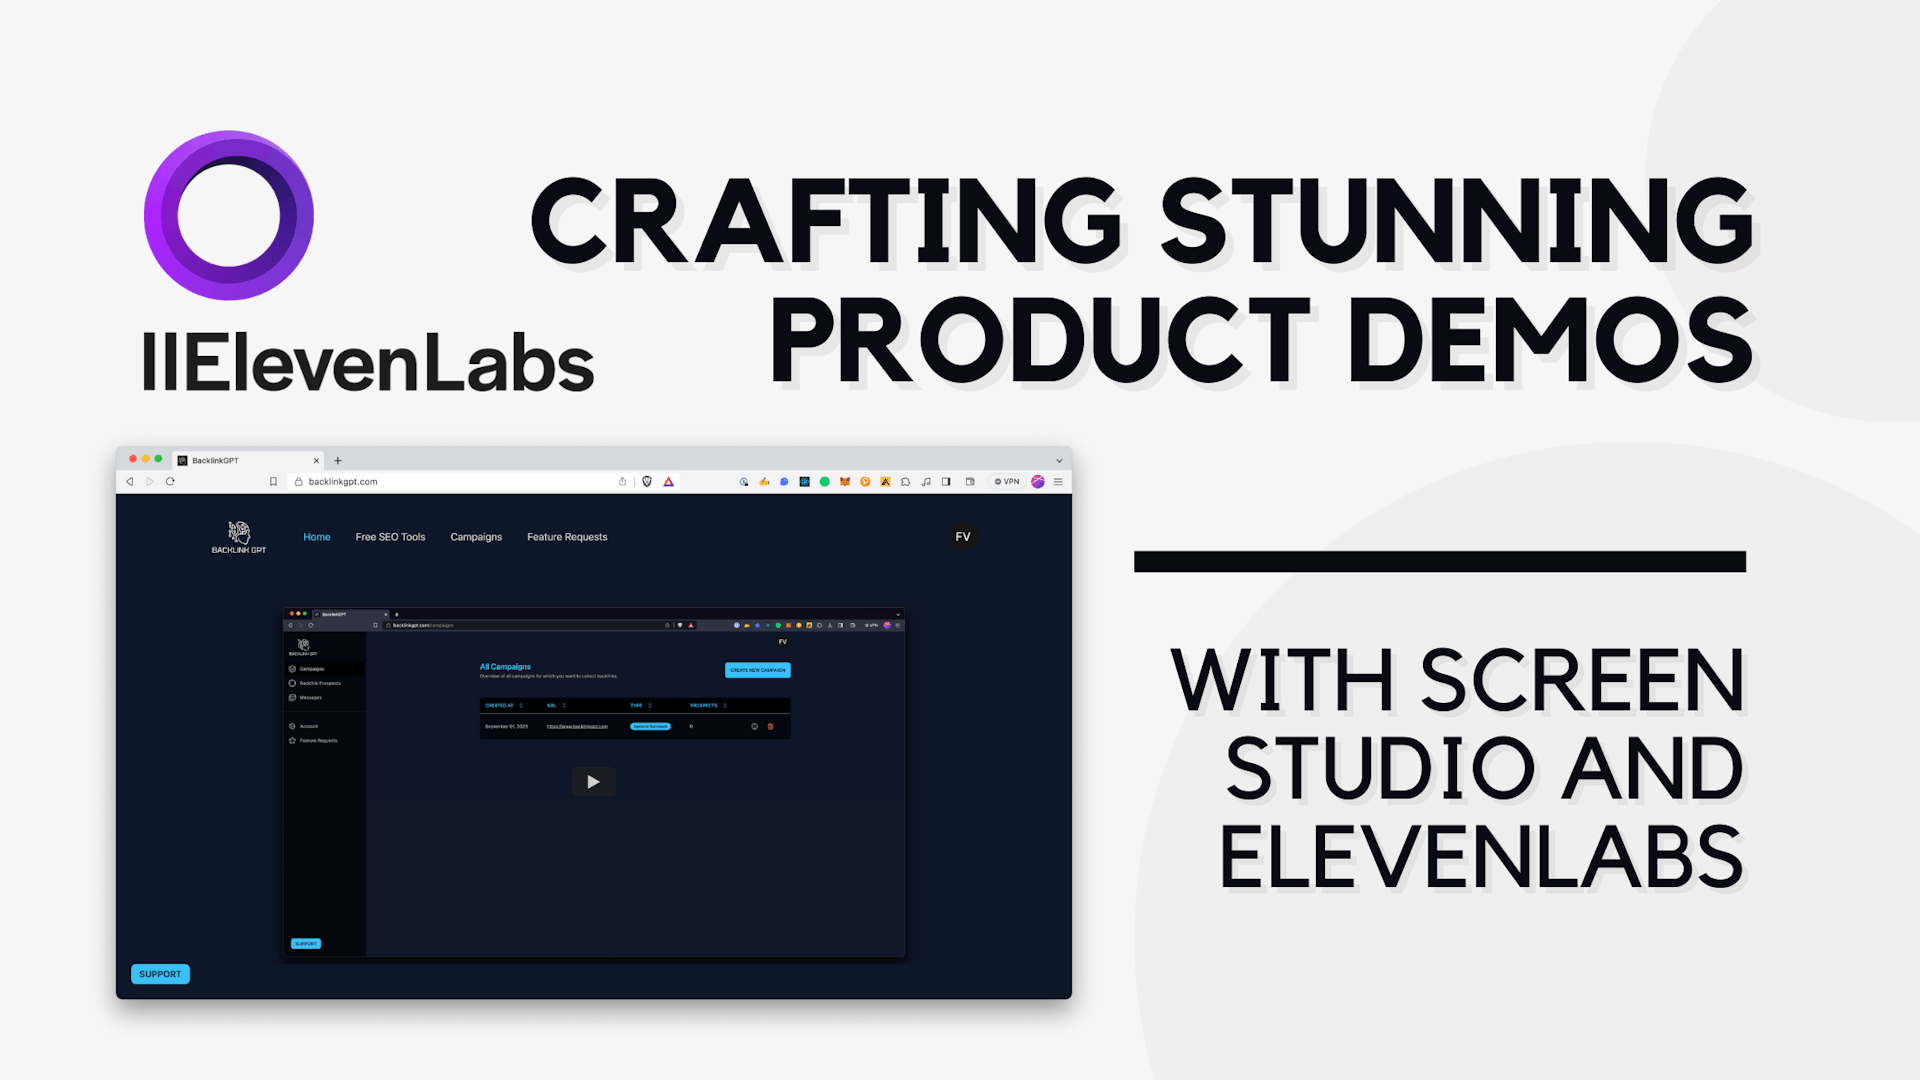 Crafting Stunning Product Demos: A Guide to Using Screencast & Elevenlabs